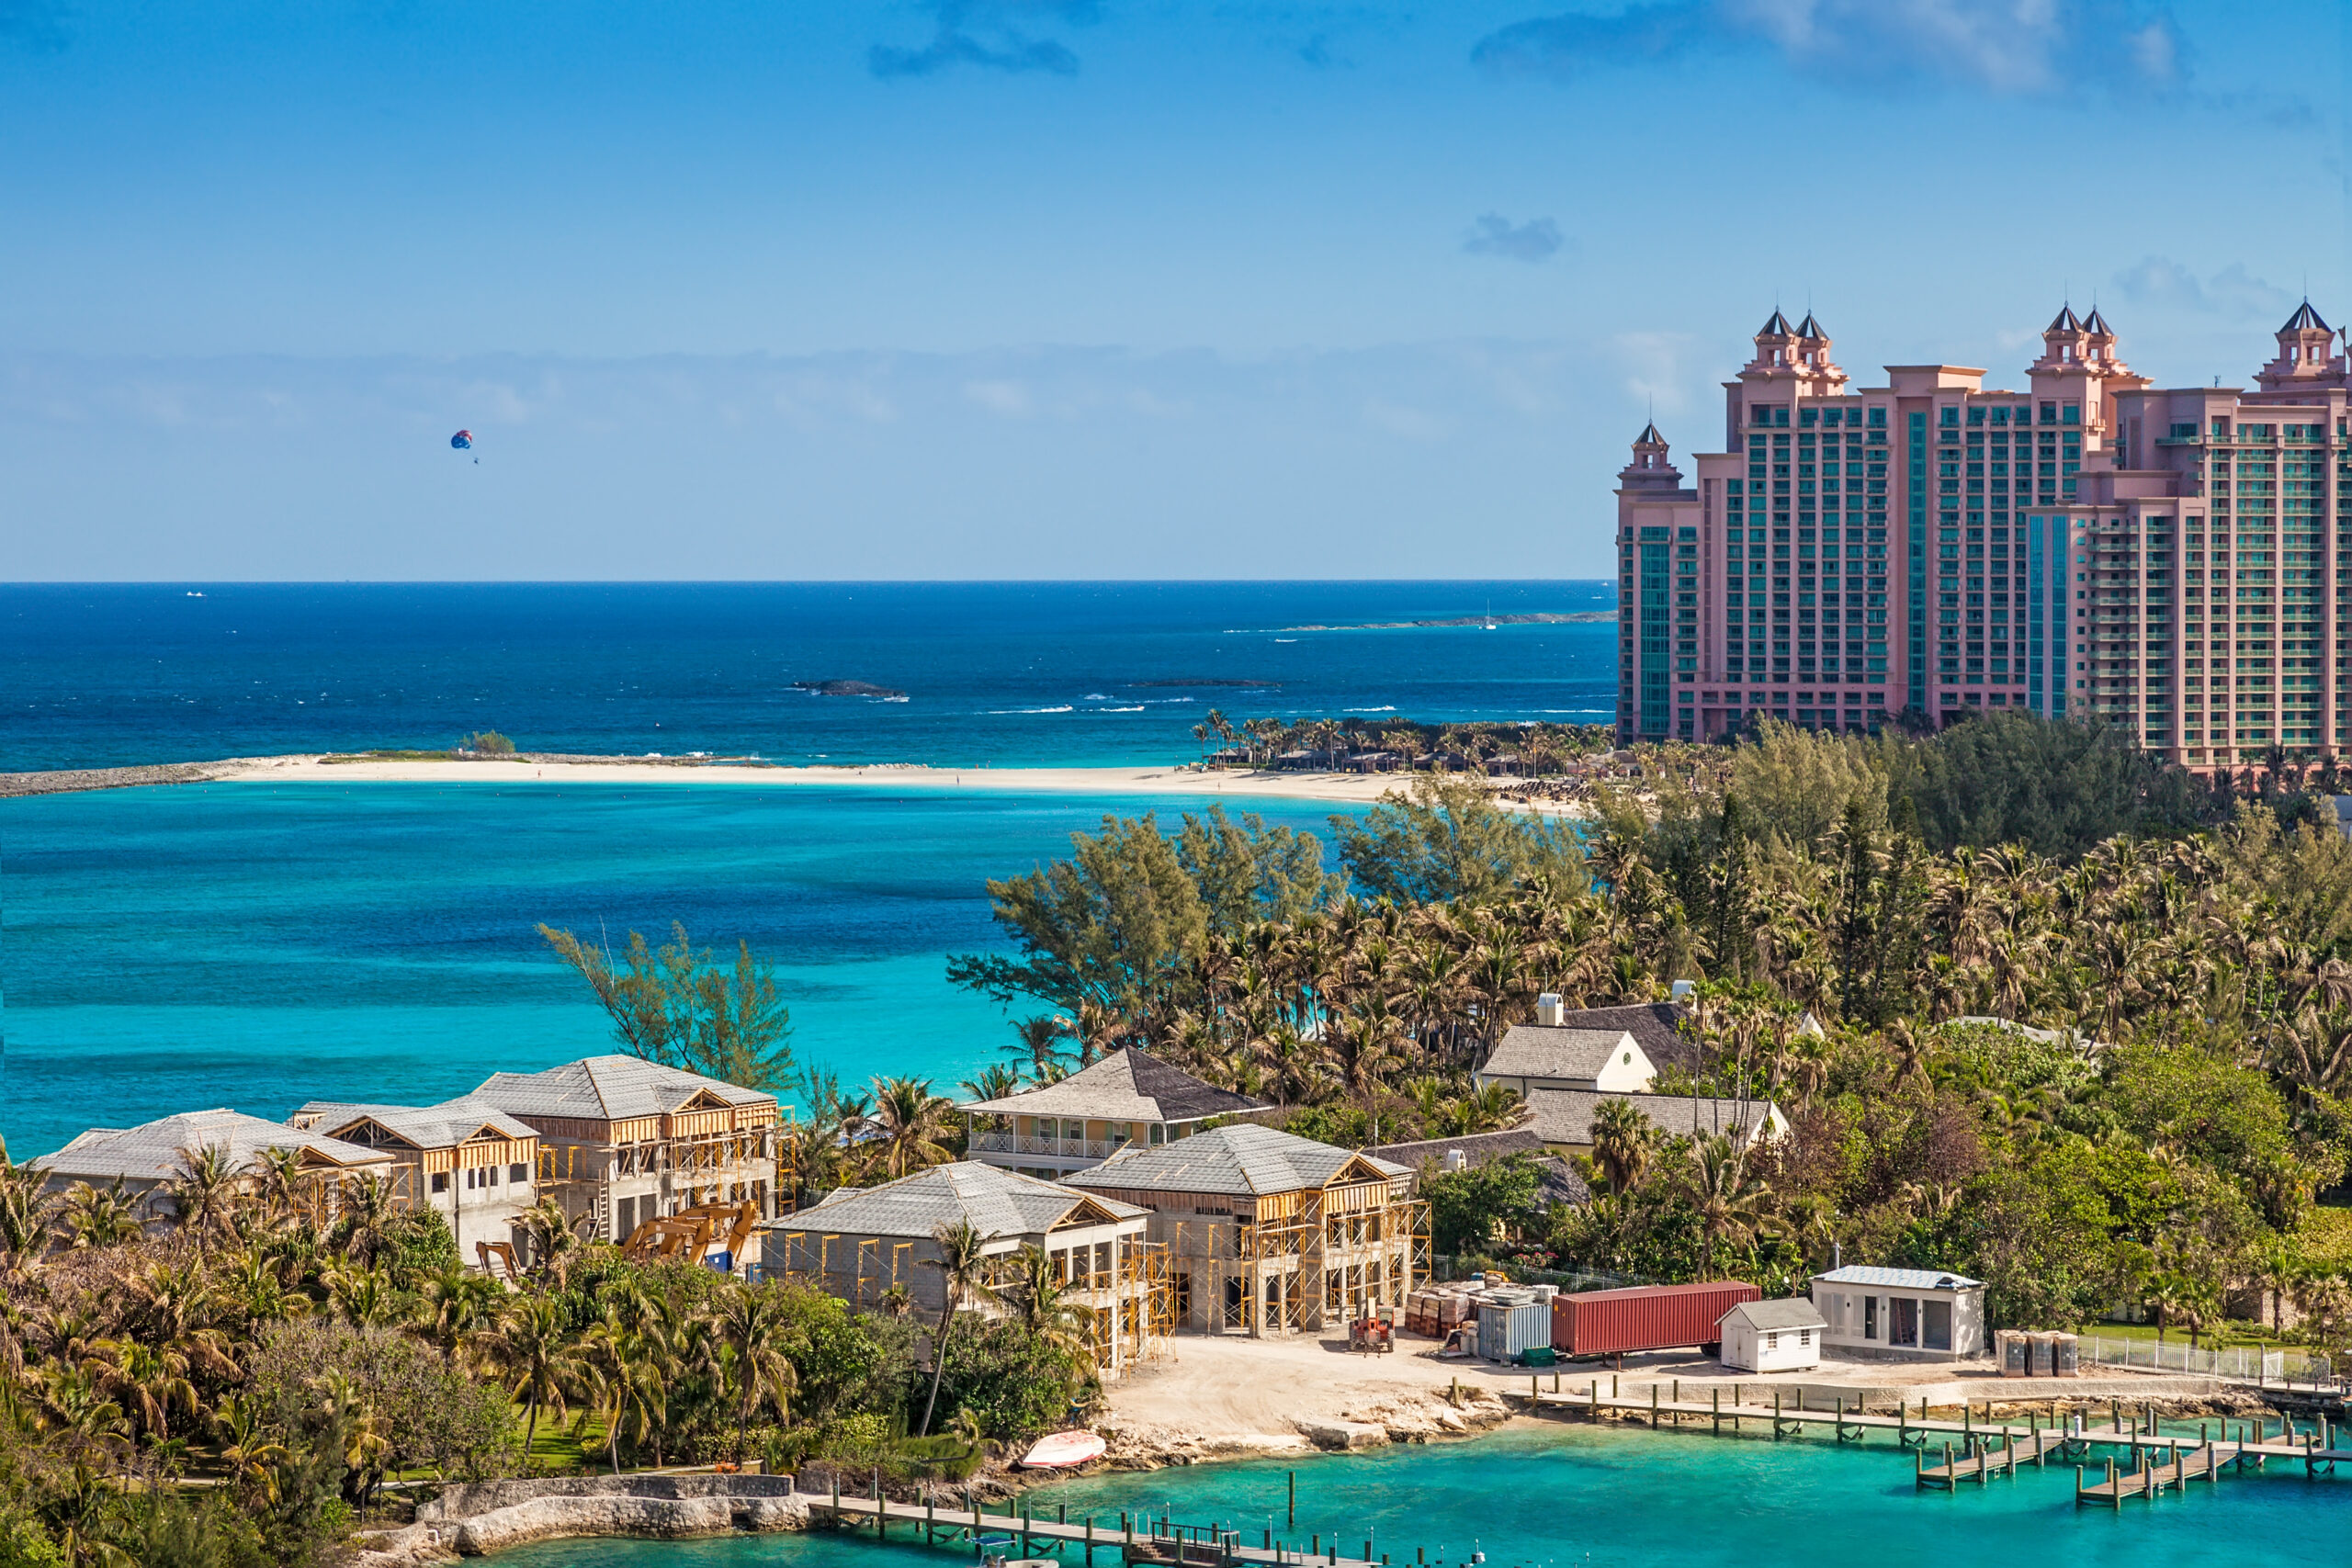 Paradise Island in Nassau, Bahamas. A pink Caribbean resort is behind palm trees and smaller buildings.